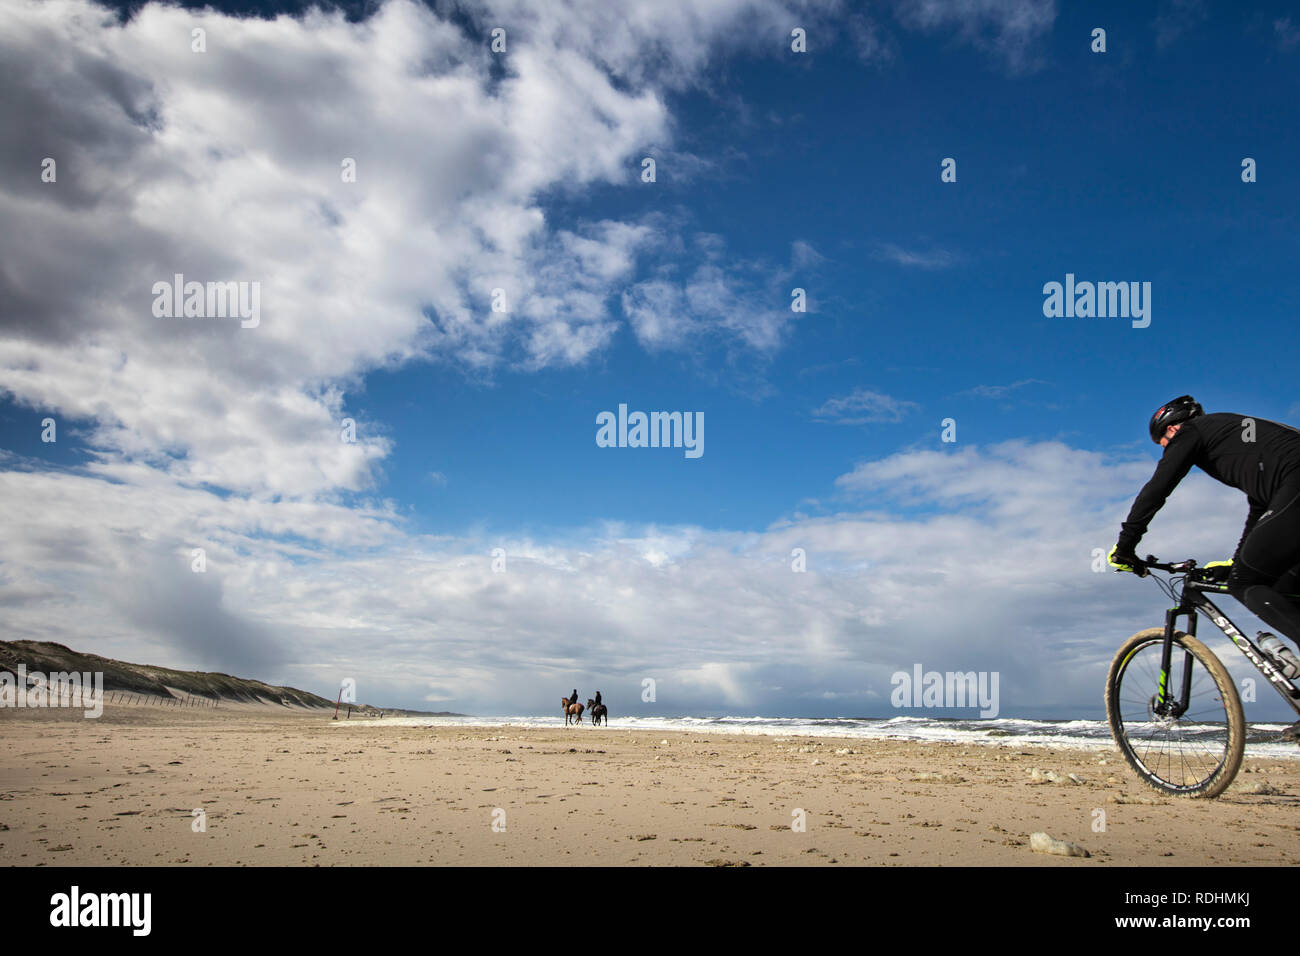 Beach of North Sea. Women riding horses, man on ATB bicycle. Groote Keten, The Netherlands. Stock Photo